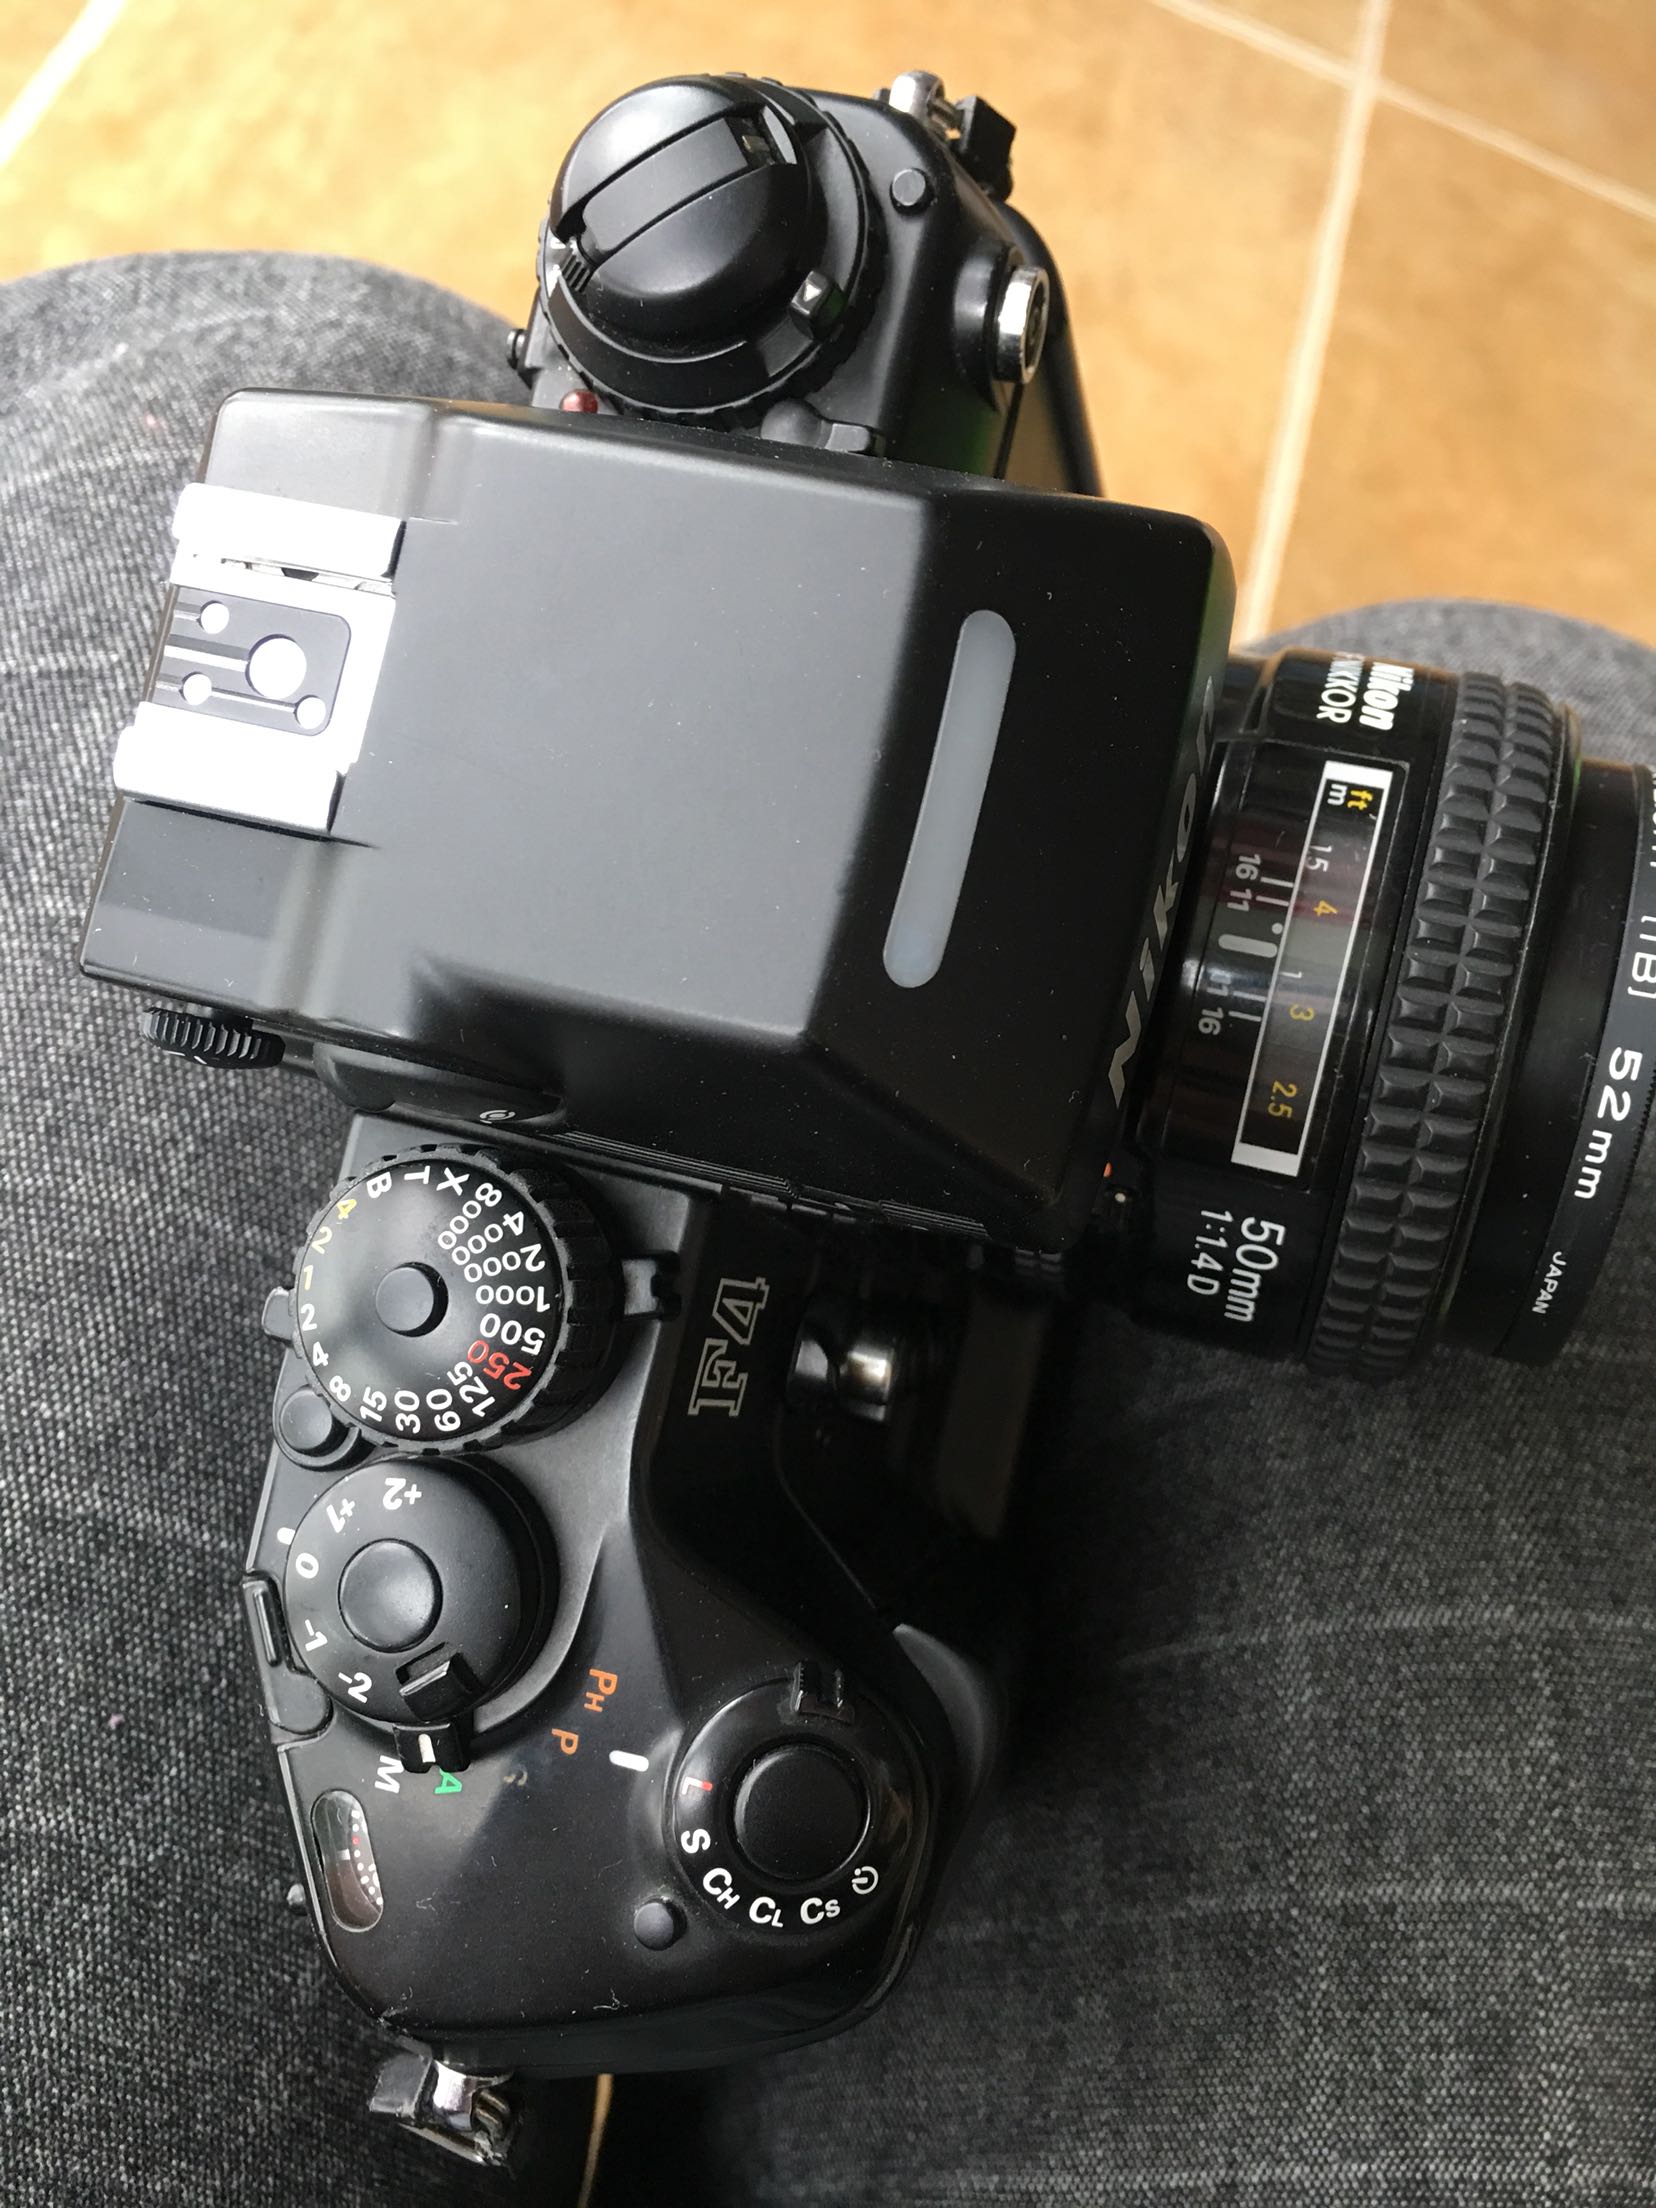  Nikon F4S has complete functions, classic automaton with 50 1.4D large aperture lens